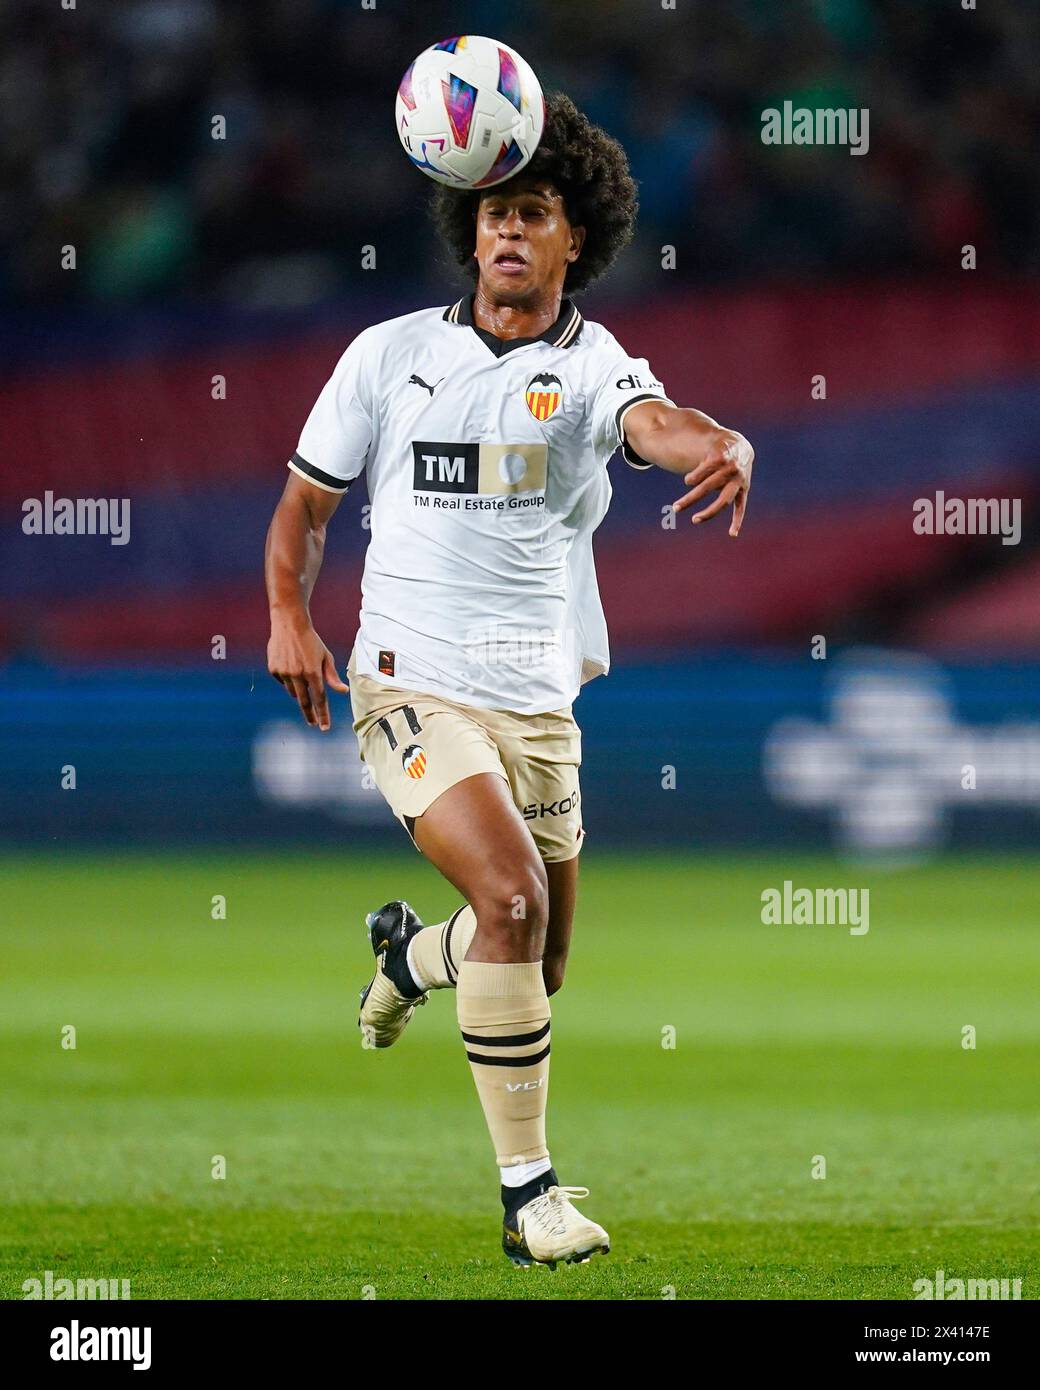 Peter Federico of Valencia CF Credit: PRESSINPHOTO SPORTS AGENCY/Alamy Live News Stock Photo